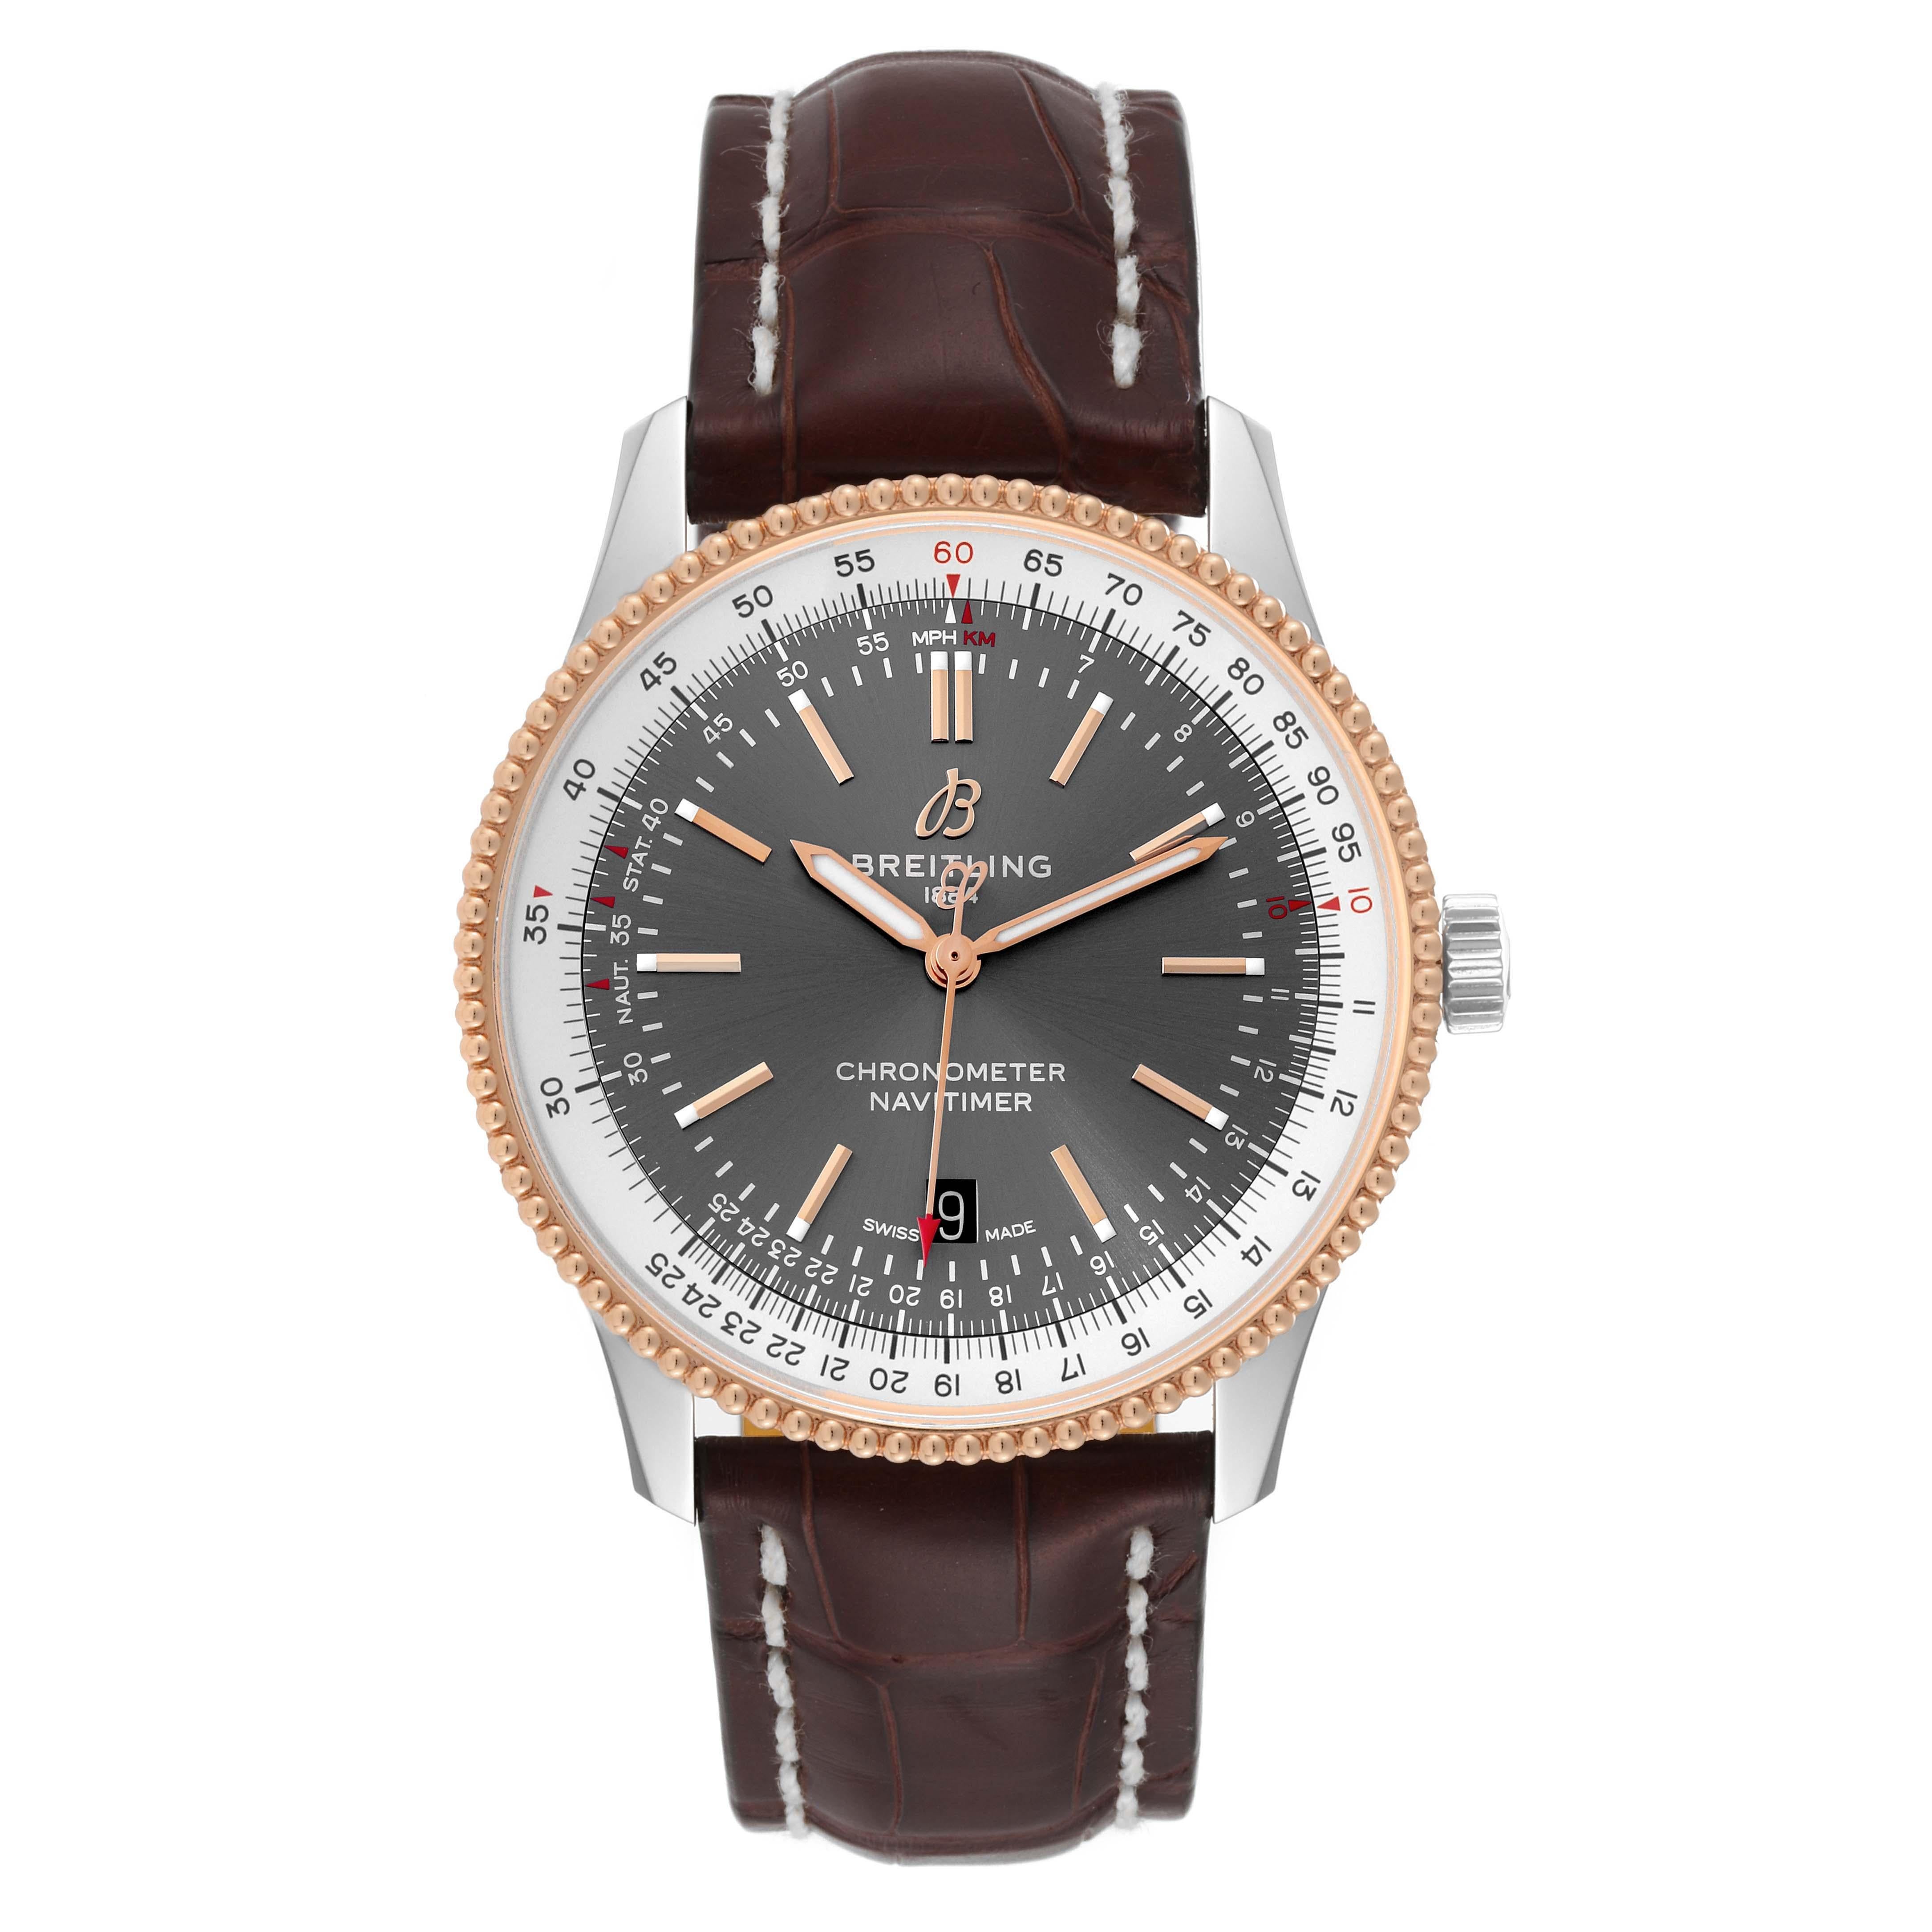 Breitling Navitimer 1 41mm Steel Rose Gold Mens Watch U17326 Card. Self-winding automatic officially certified chronometer movement. Stainless steel case 41 mm in diameter. 18k rose gold bidirectional revolving slide-rule bezel. Scratch resistant